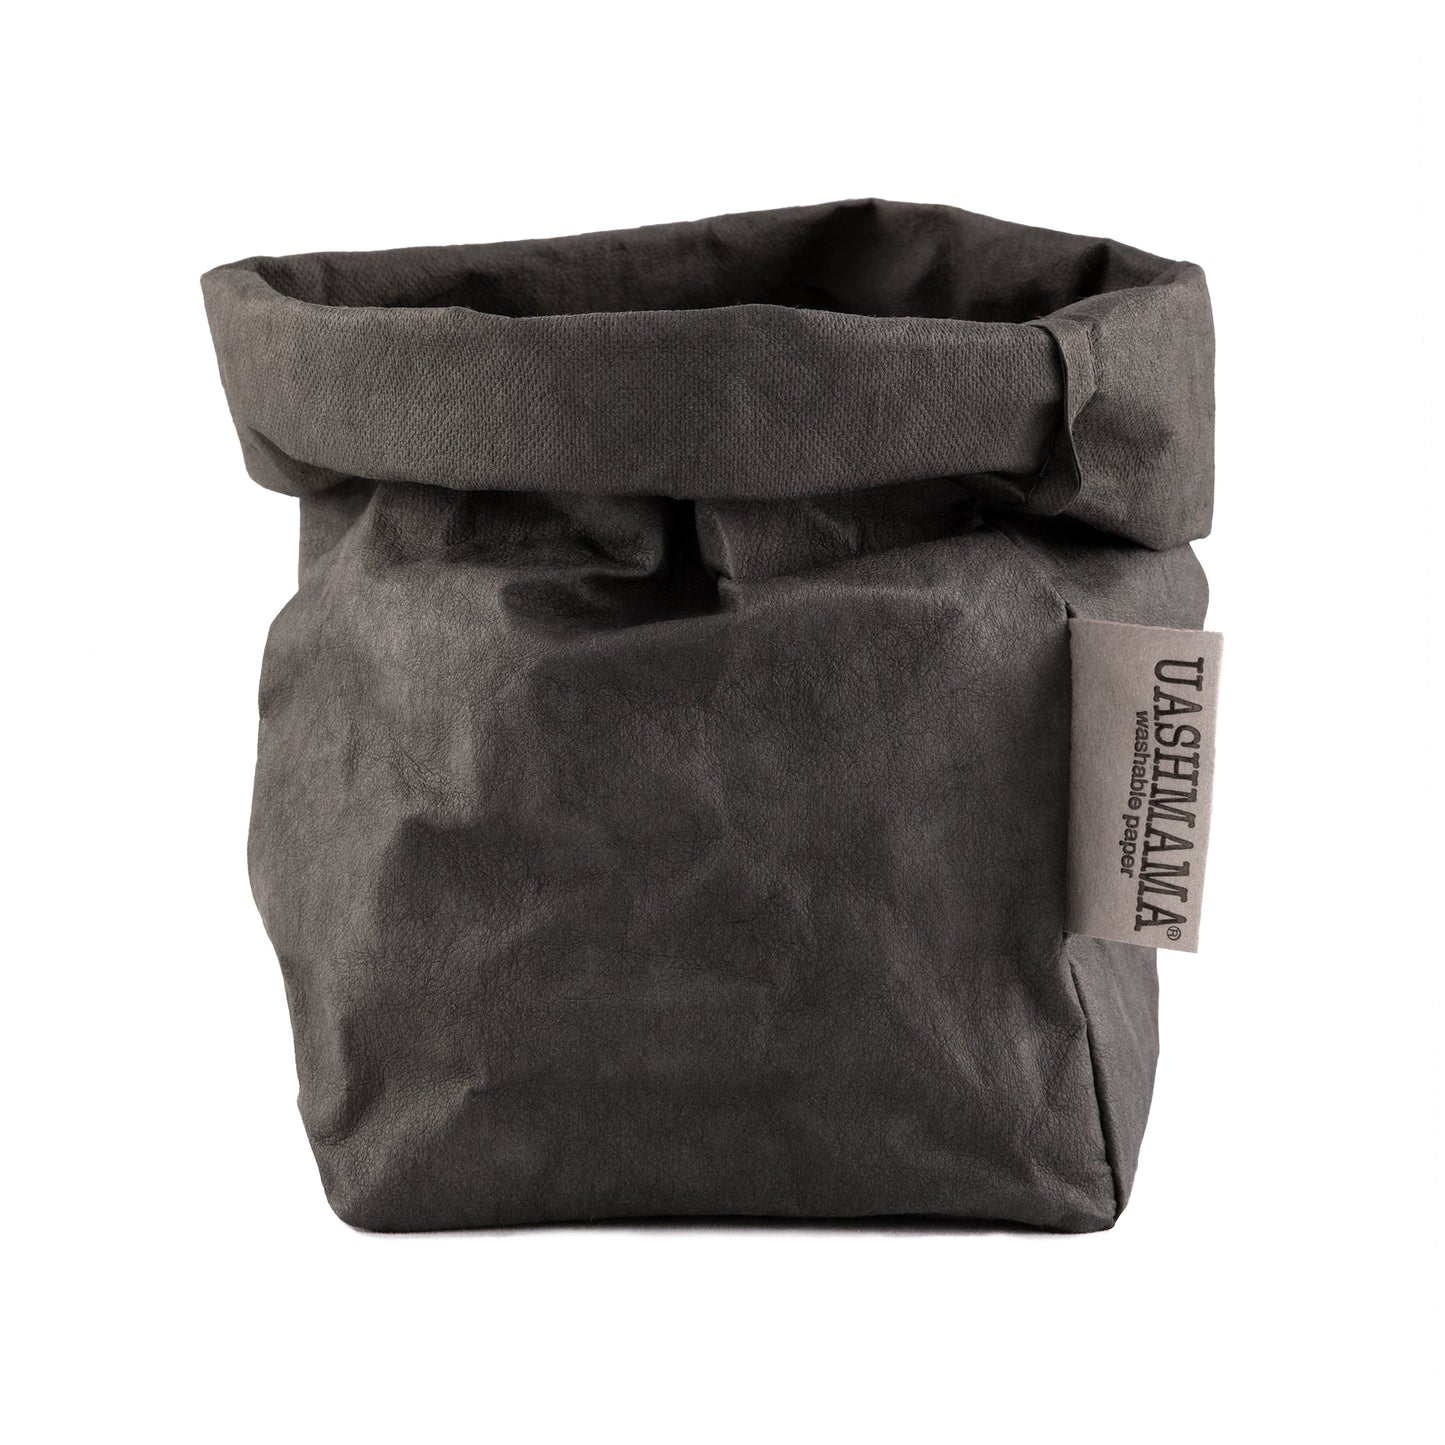 A washable paper bag is shown. The bag is rolled down at the top and features a UASHMAMA logo label on the bottom left corner. The bag pictured is the small size in dark grey.